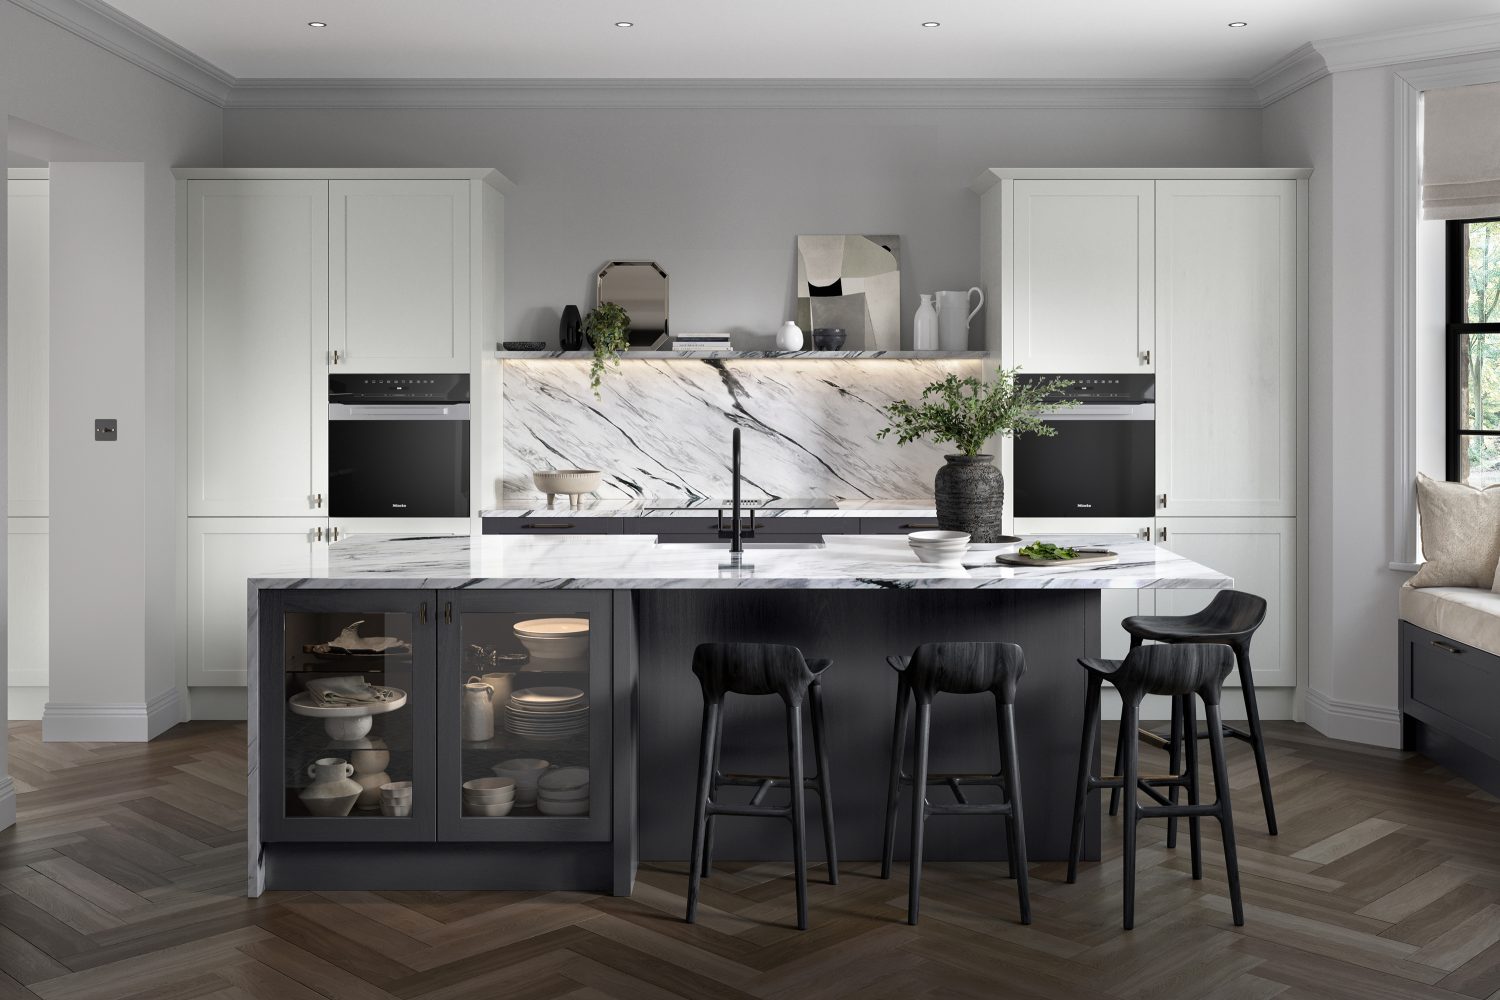 Alana Graphite & Light Grey shaker kitchen made by The Kitchen Depot featuring light worktops and stools around island